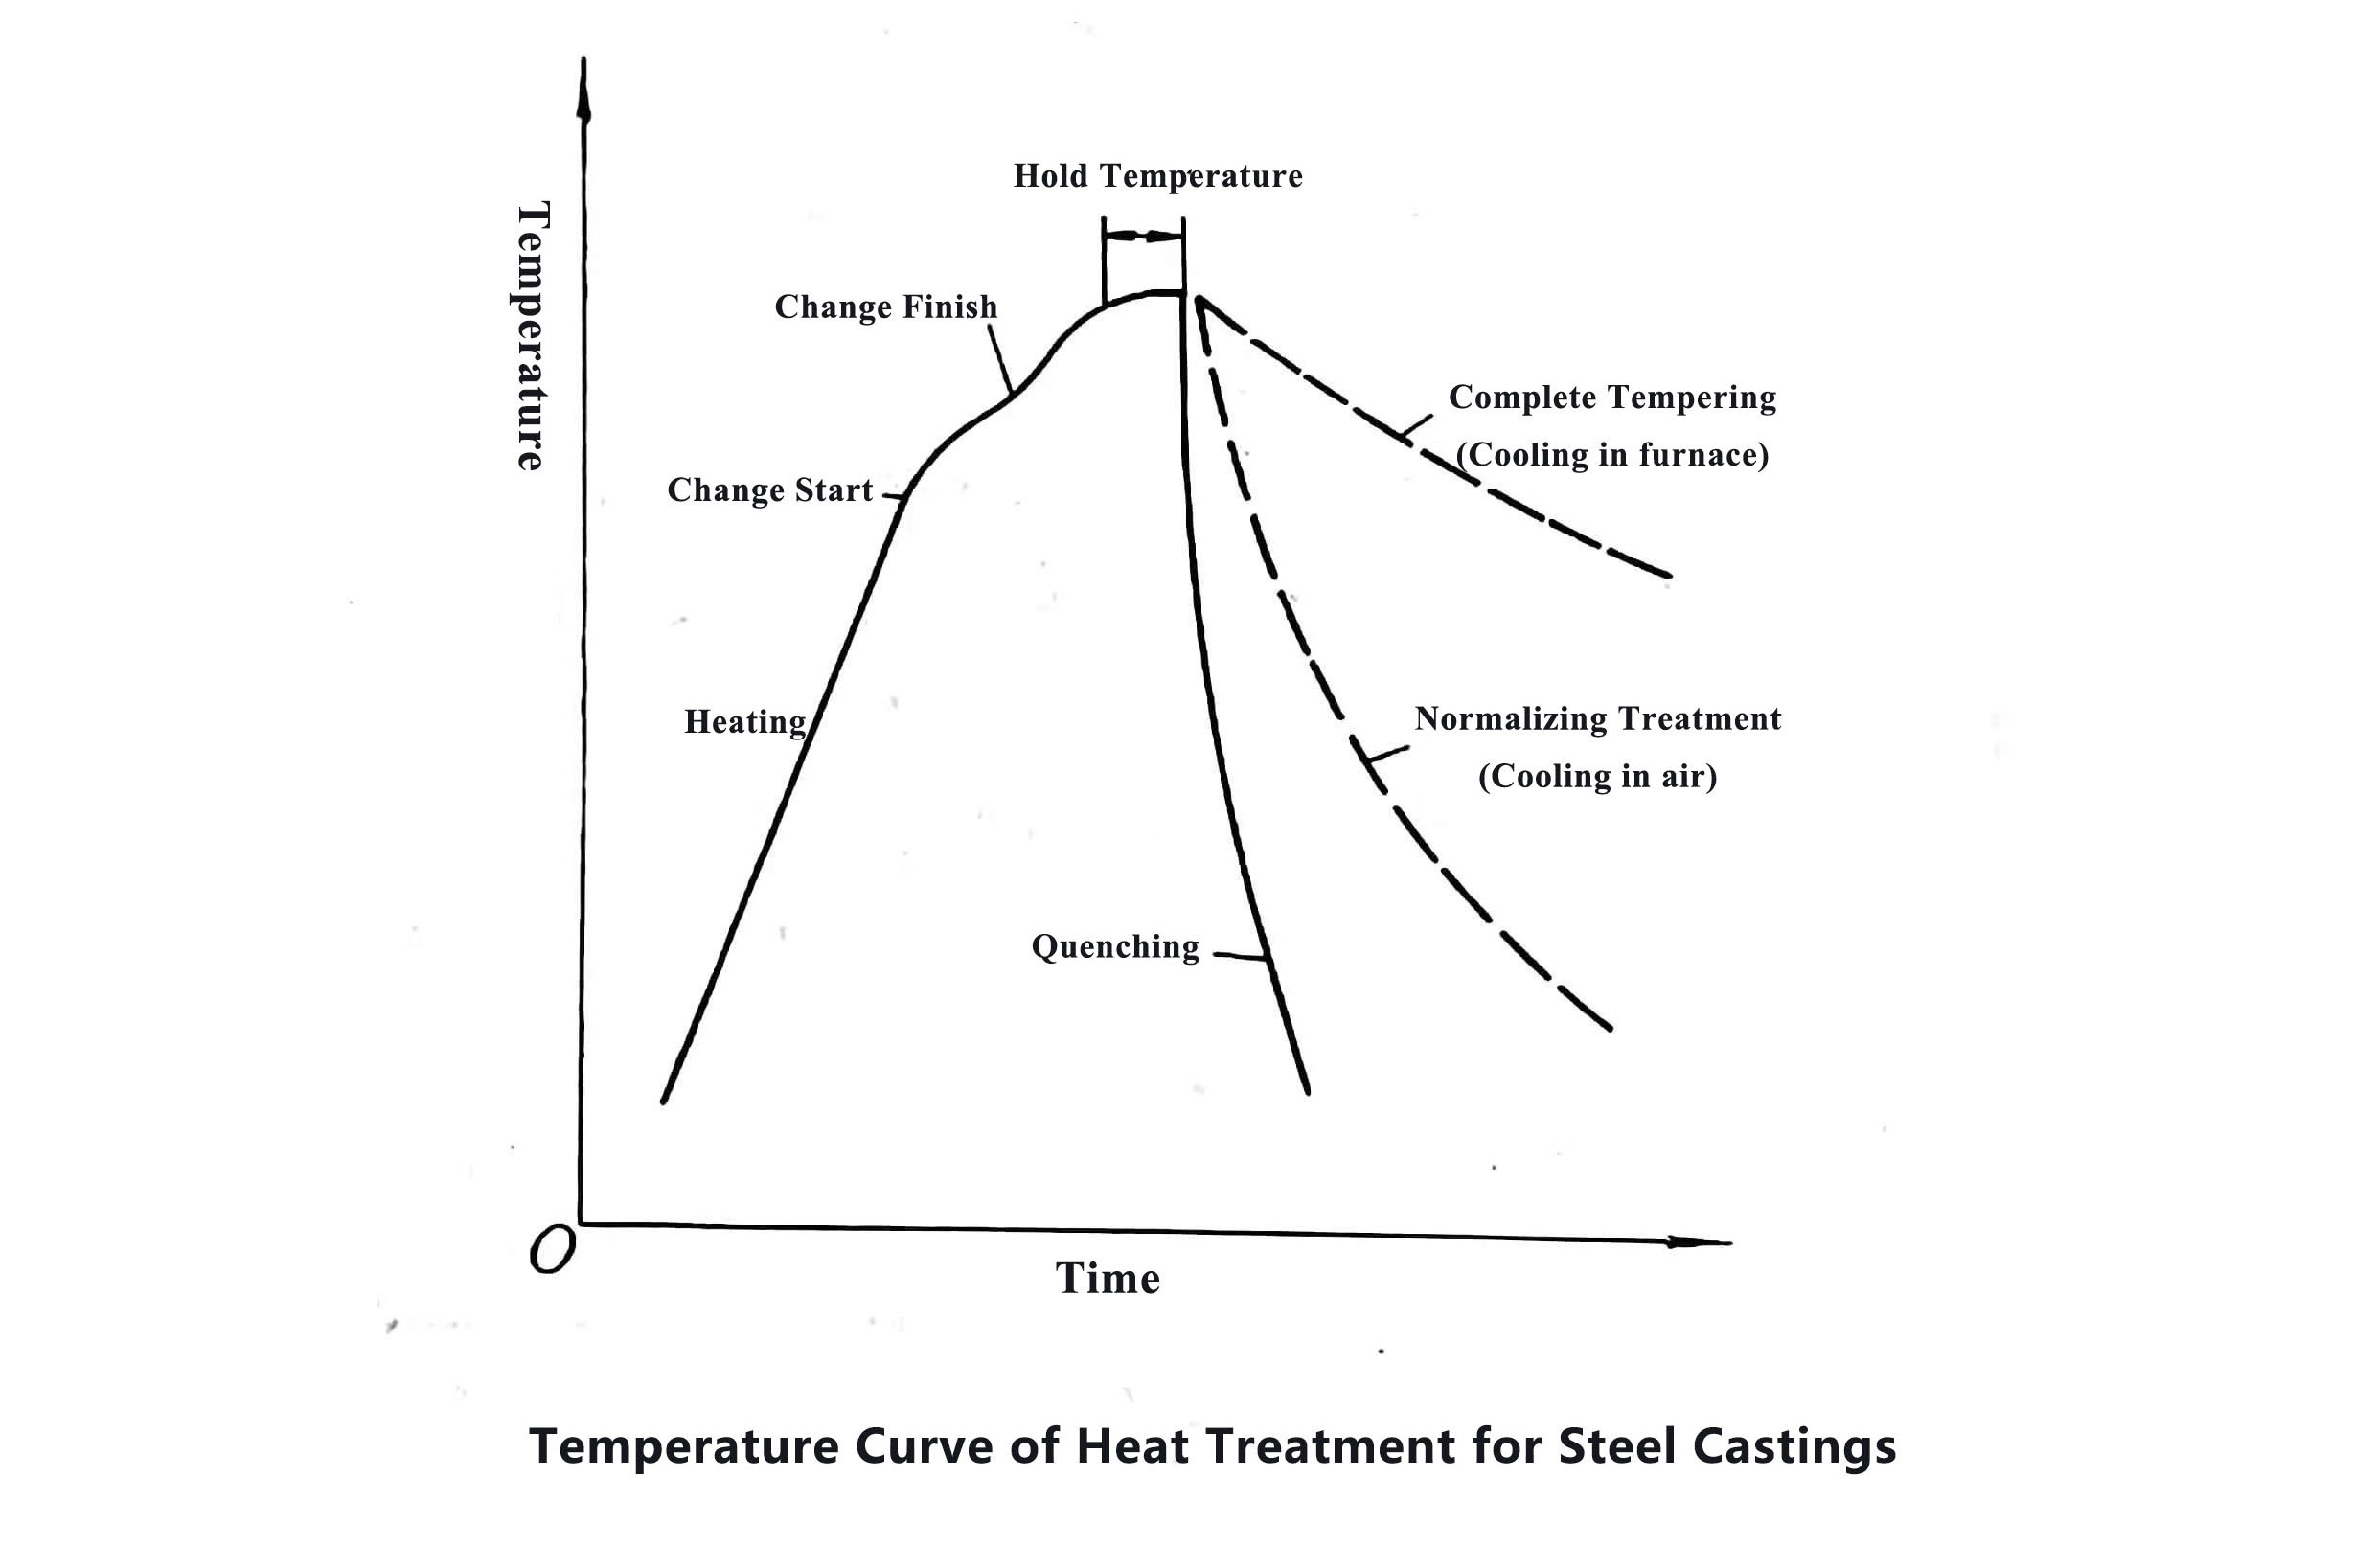 Temperature Curve of Heat Treatment for Steel Castings